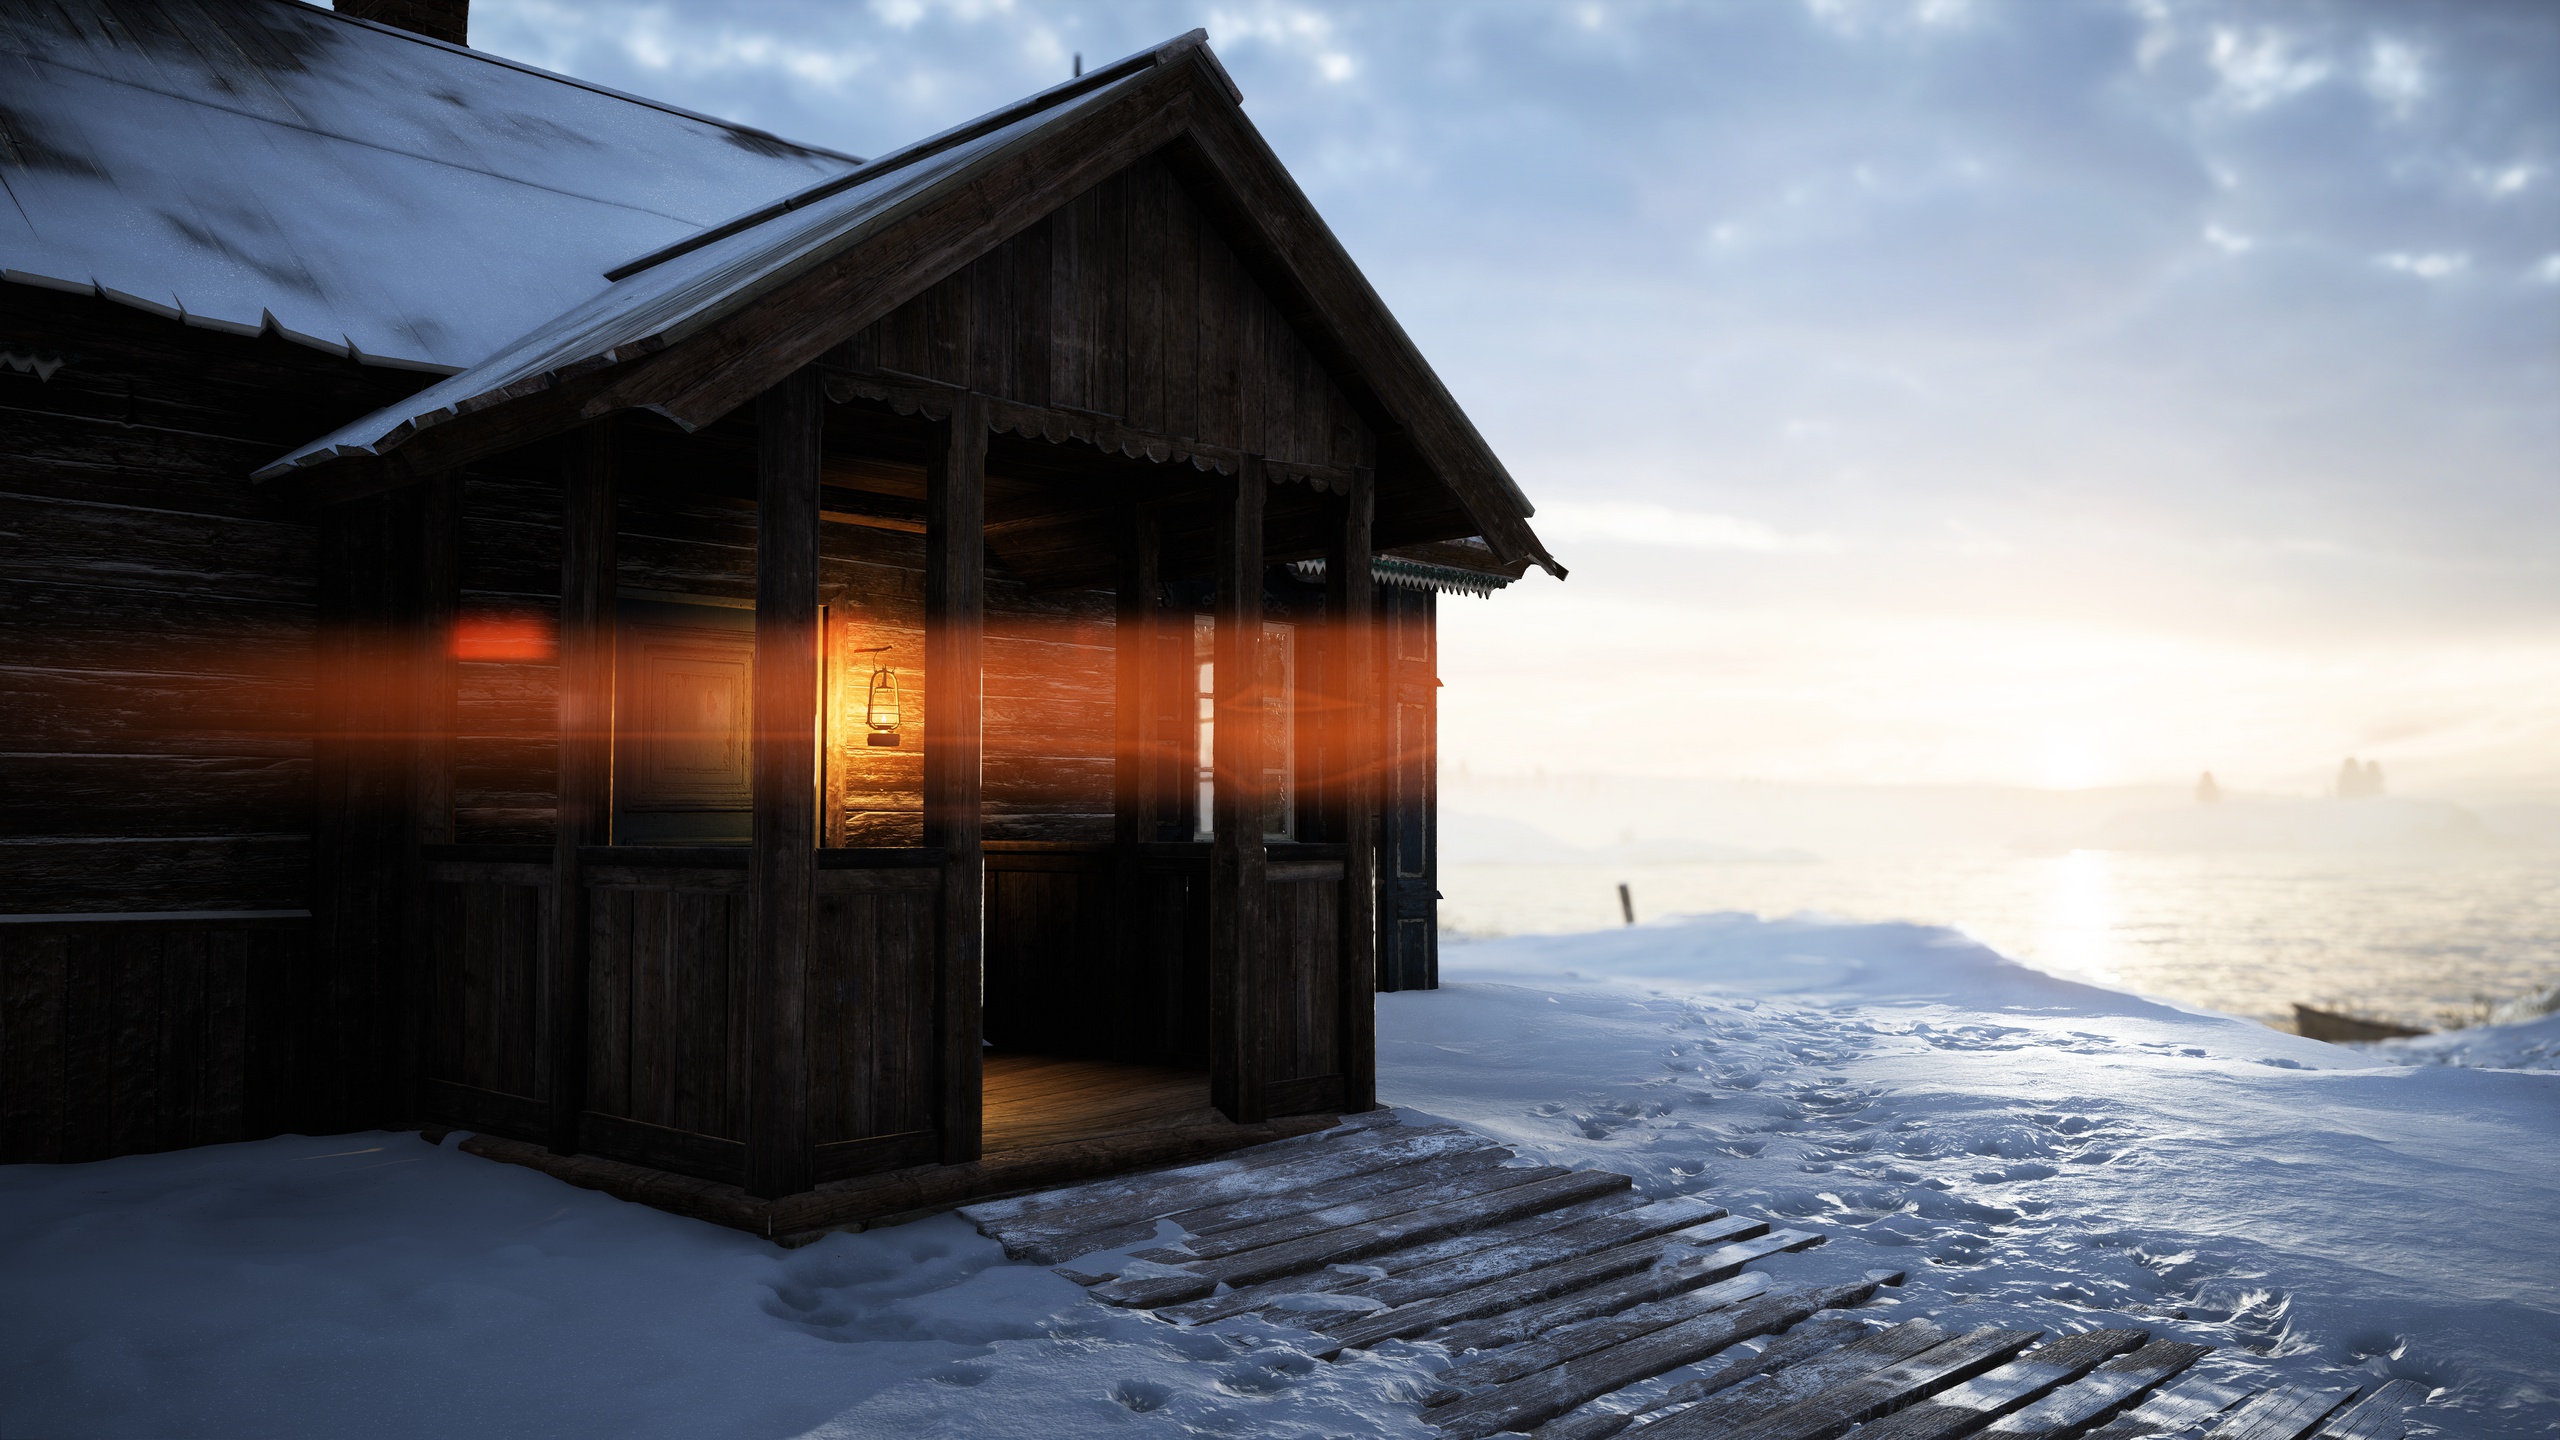 General 2560x1440 winter snow cold house